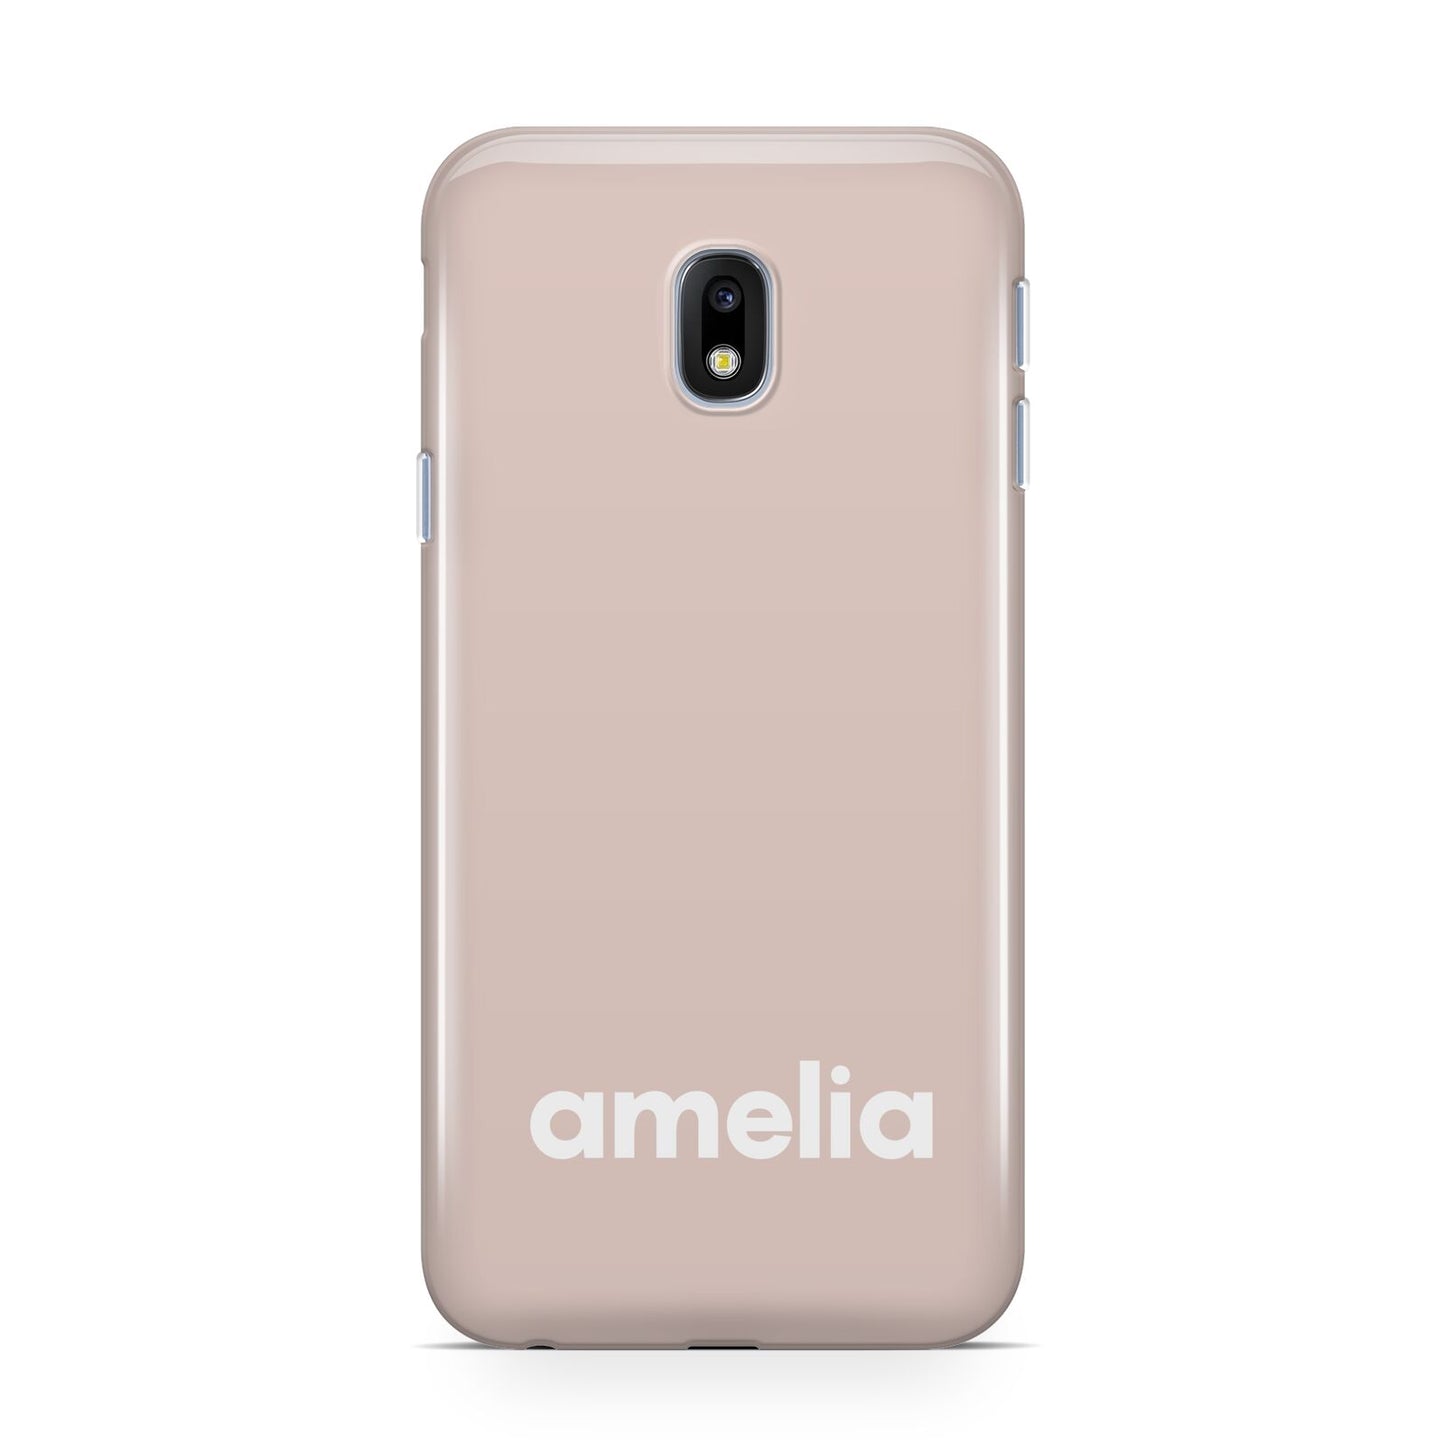 Simple Blush Pink with Name Samsung Galaxy J3 2017 Case